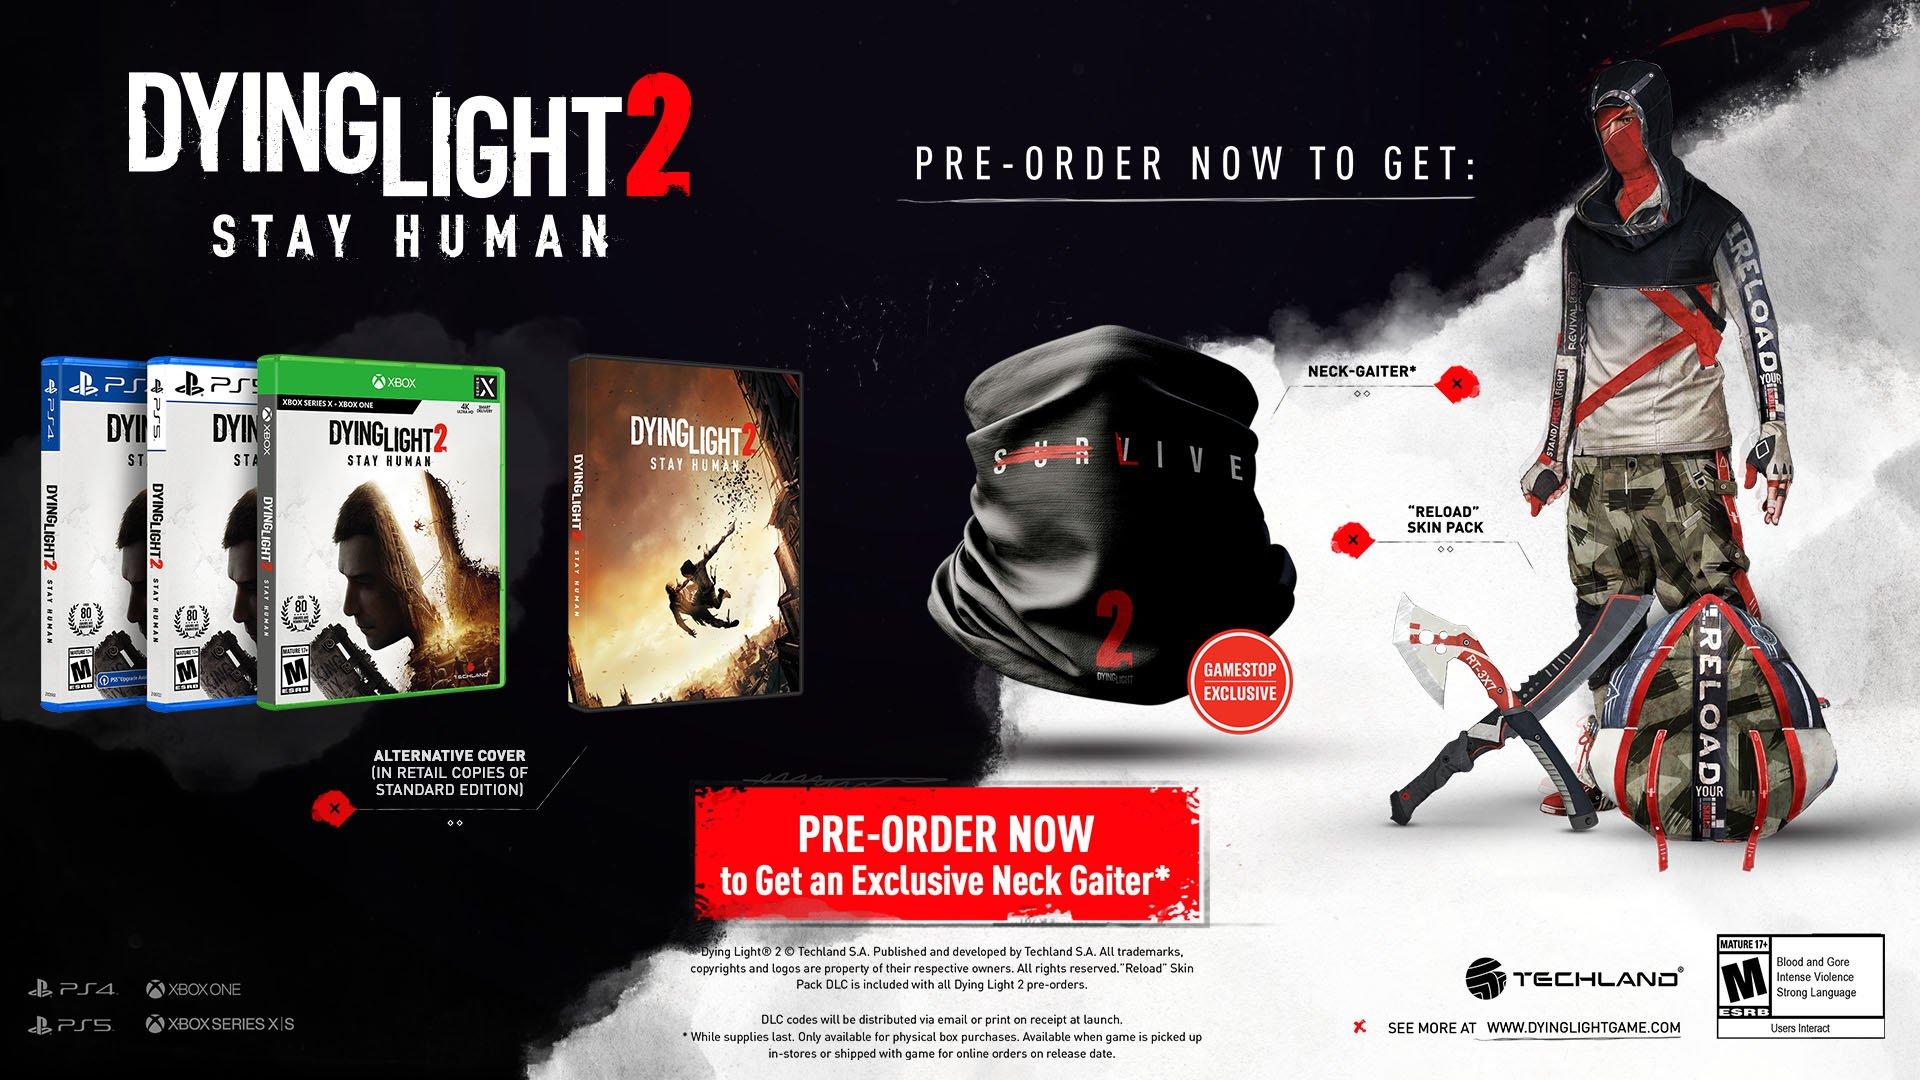 Discover Dying Light 2 Stay Human CGI Trailer, New Pre-Order Bonus, and  Techland's Special Anniversary Offers - Xbox Wire